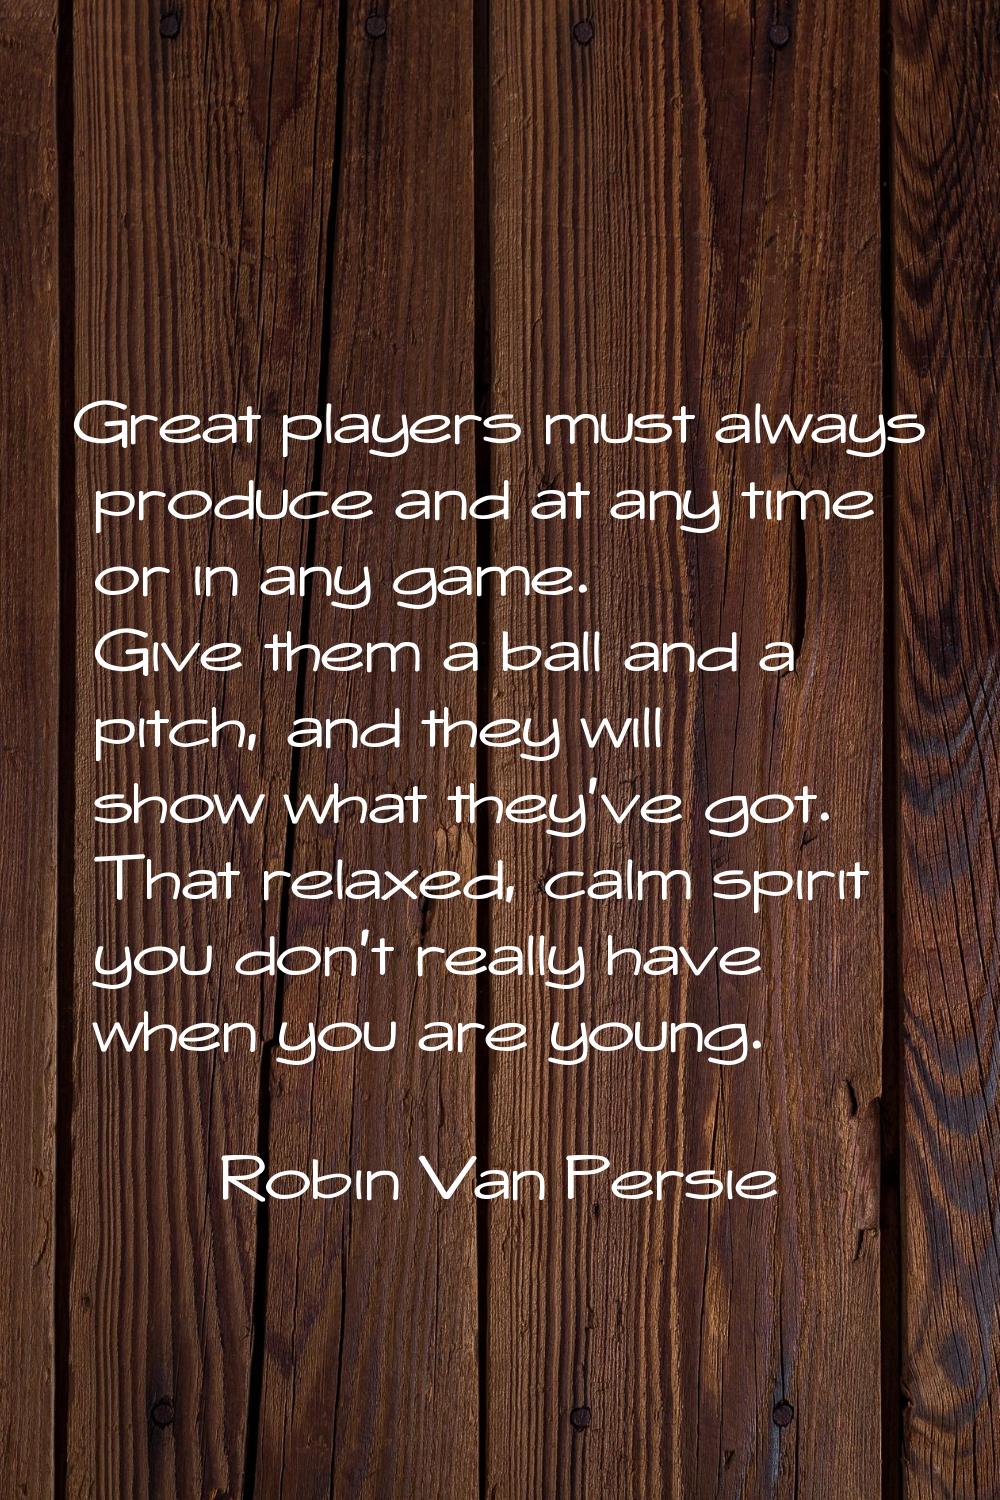 Great players must always produce and at any time or in any game. Give them a ball and a pitch, and